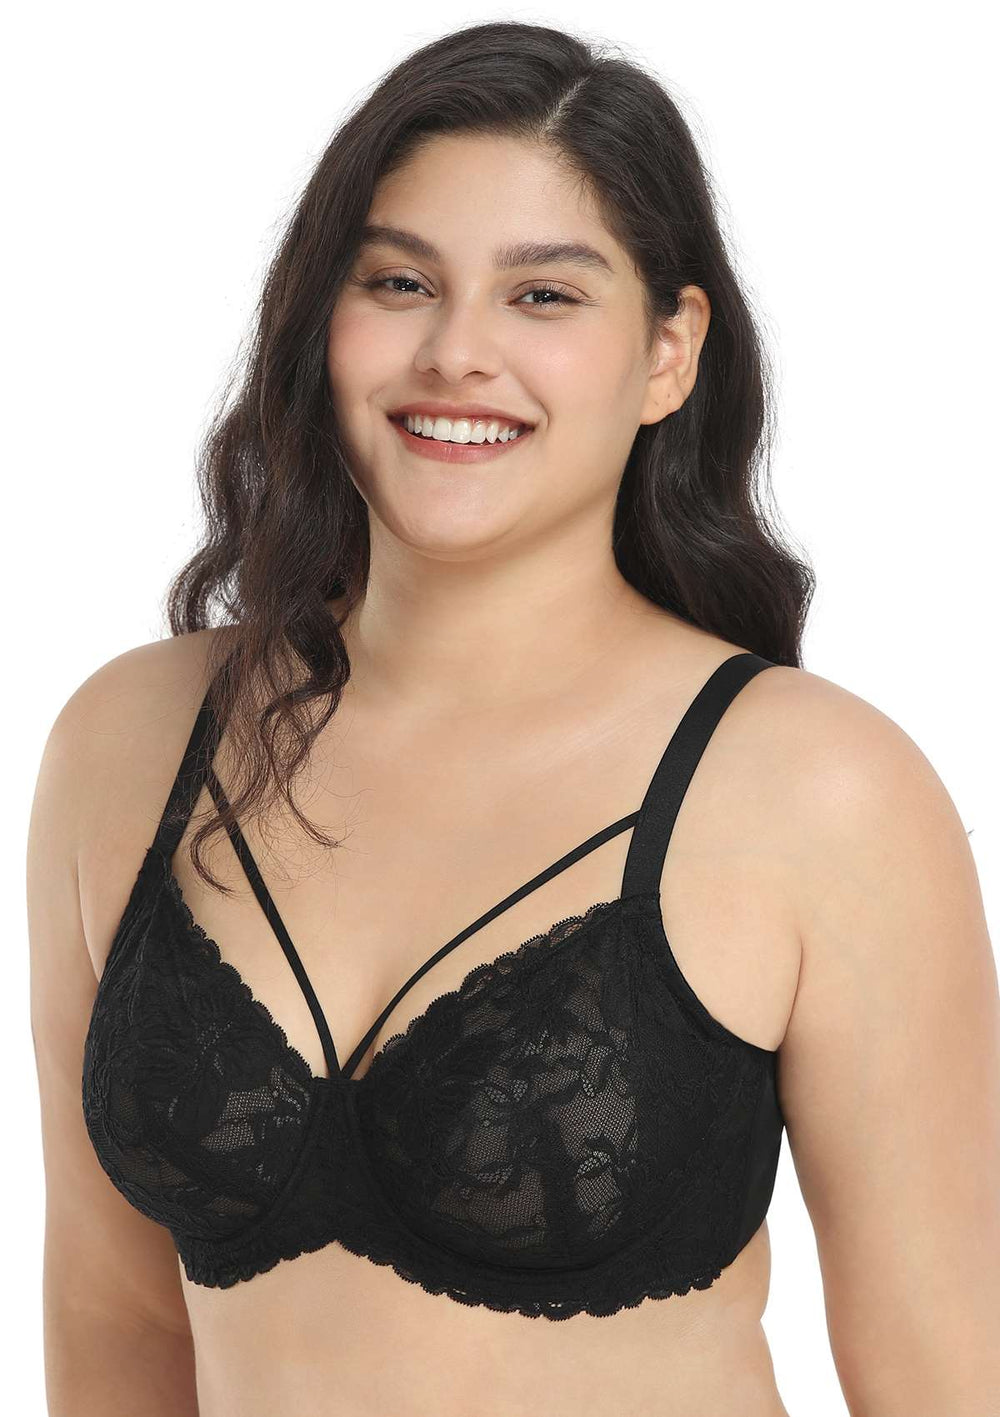 HSIA Sexy Halter Lace Bralette Lingerie